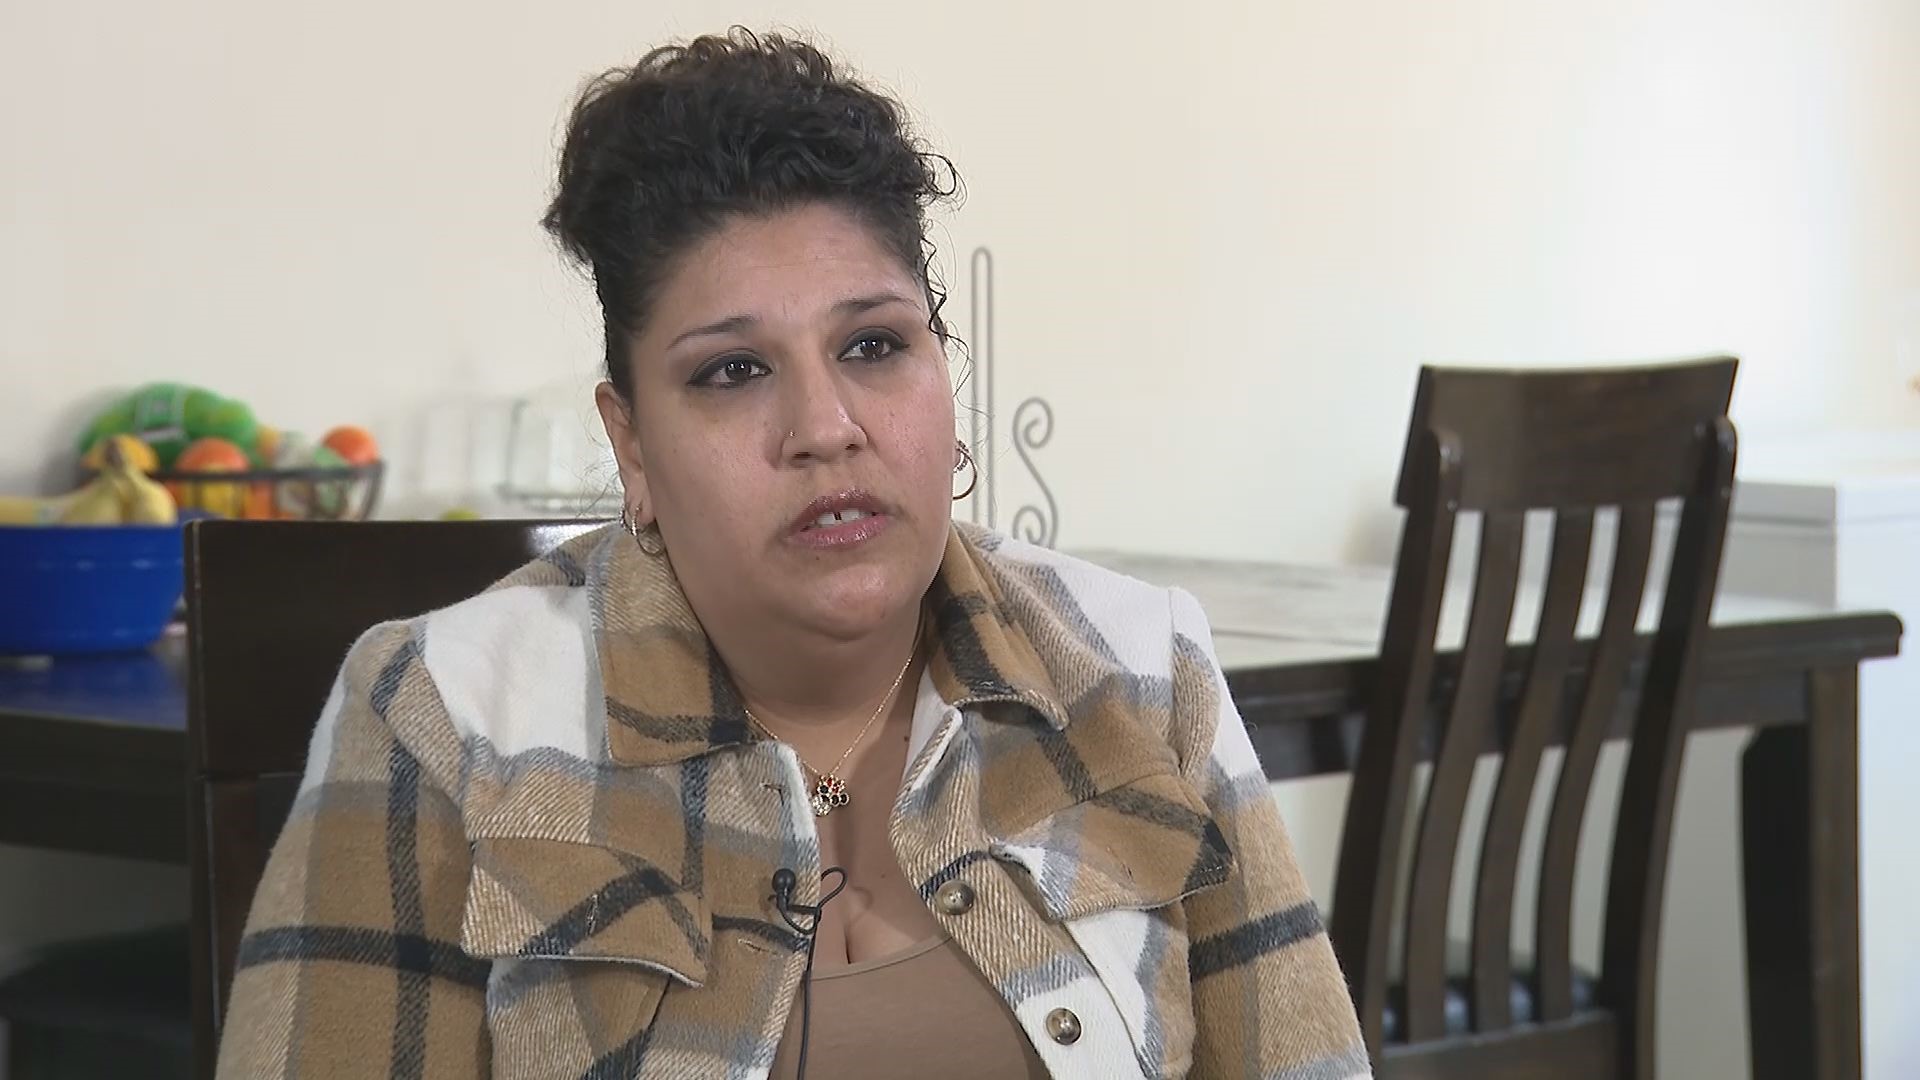 A Franklin County woman tells our I-Team that a surgeon operated on the wrong part of her spine twice. She took the surgeon to court, and a jury ruled in her favor.